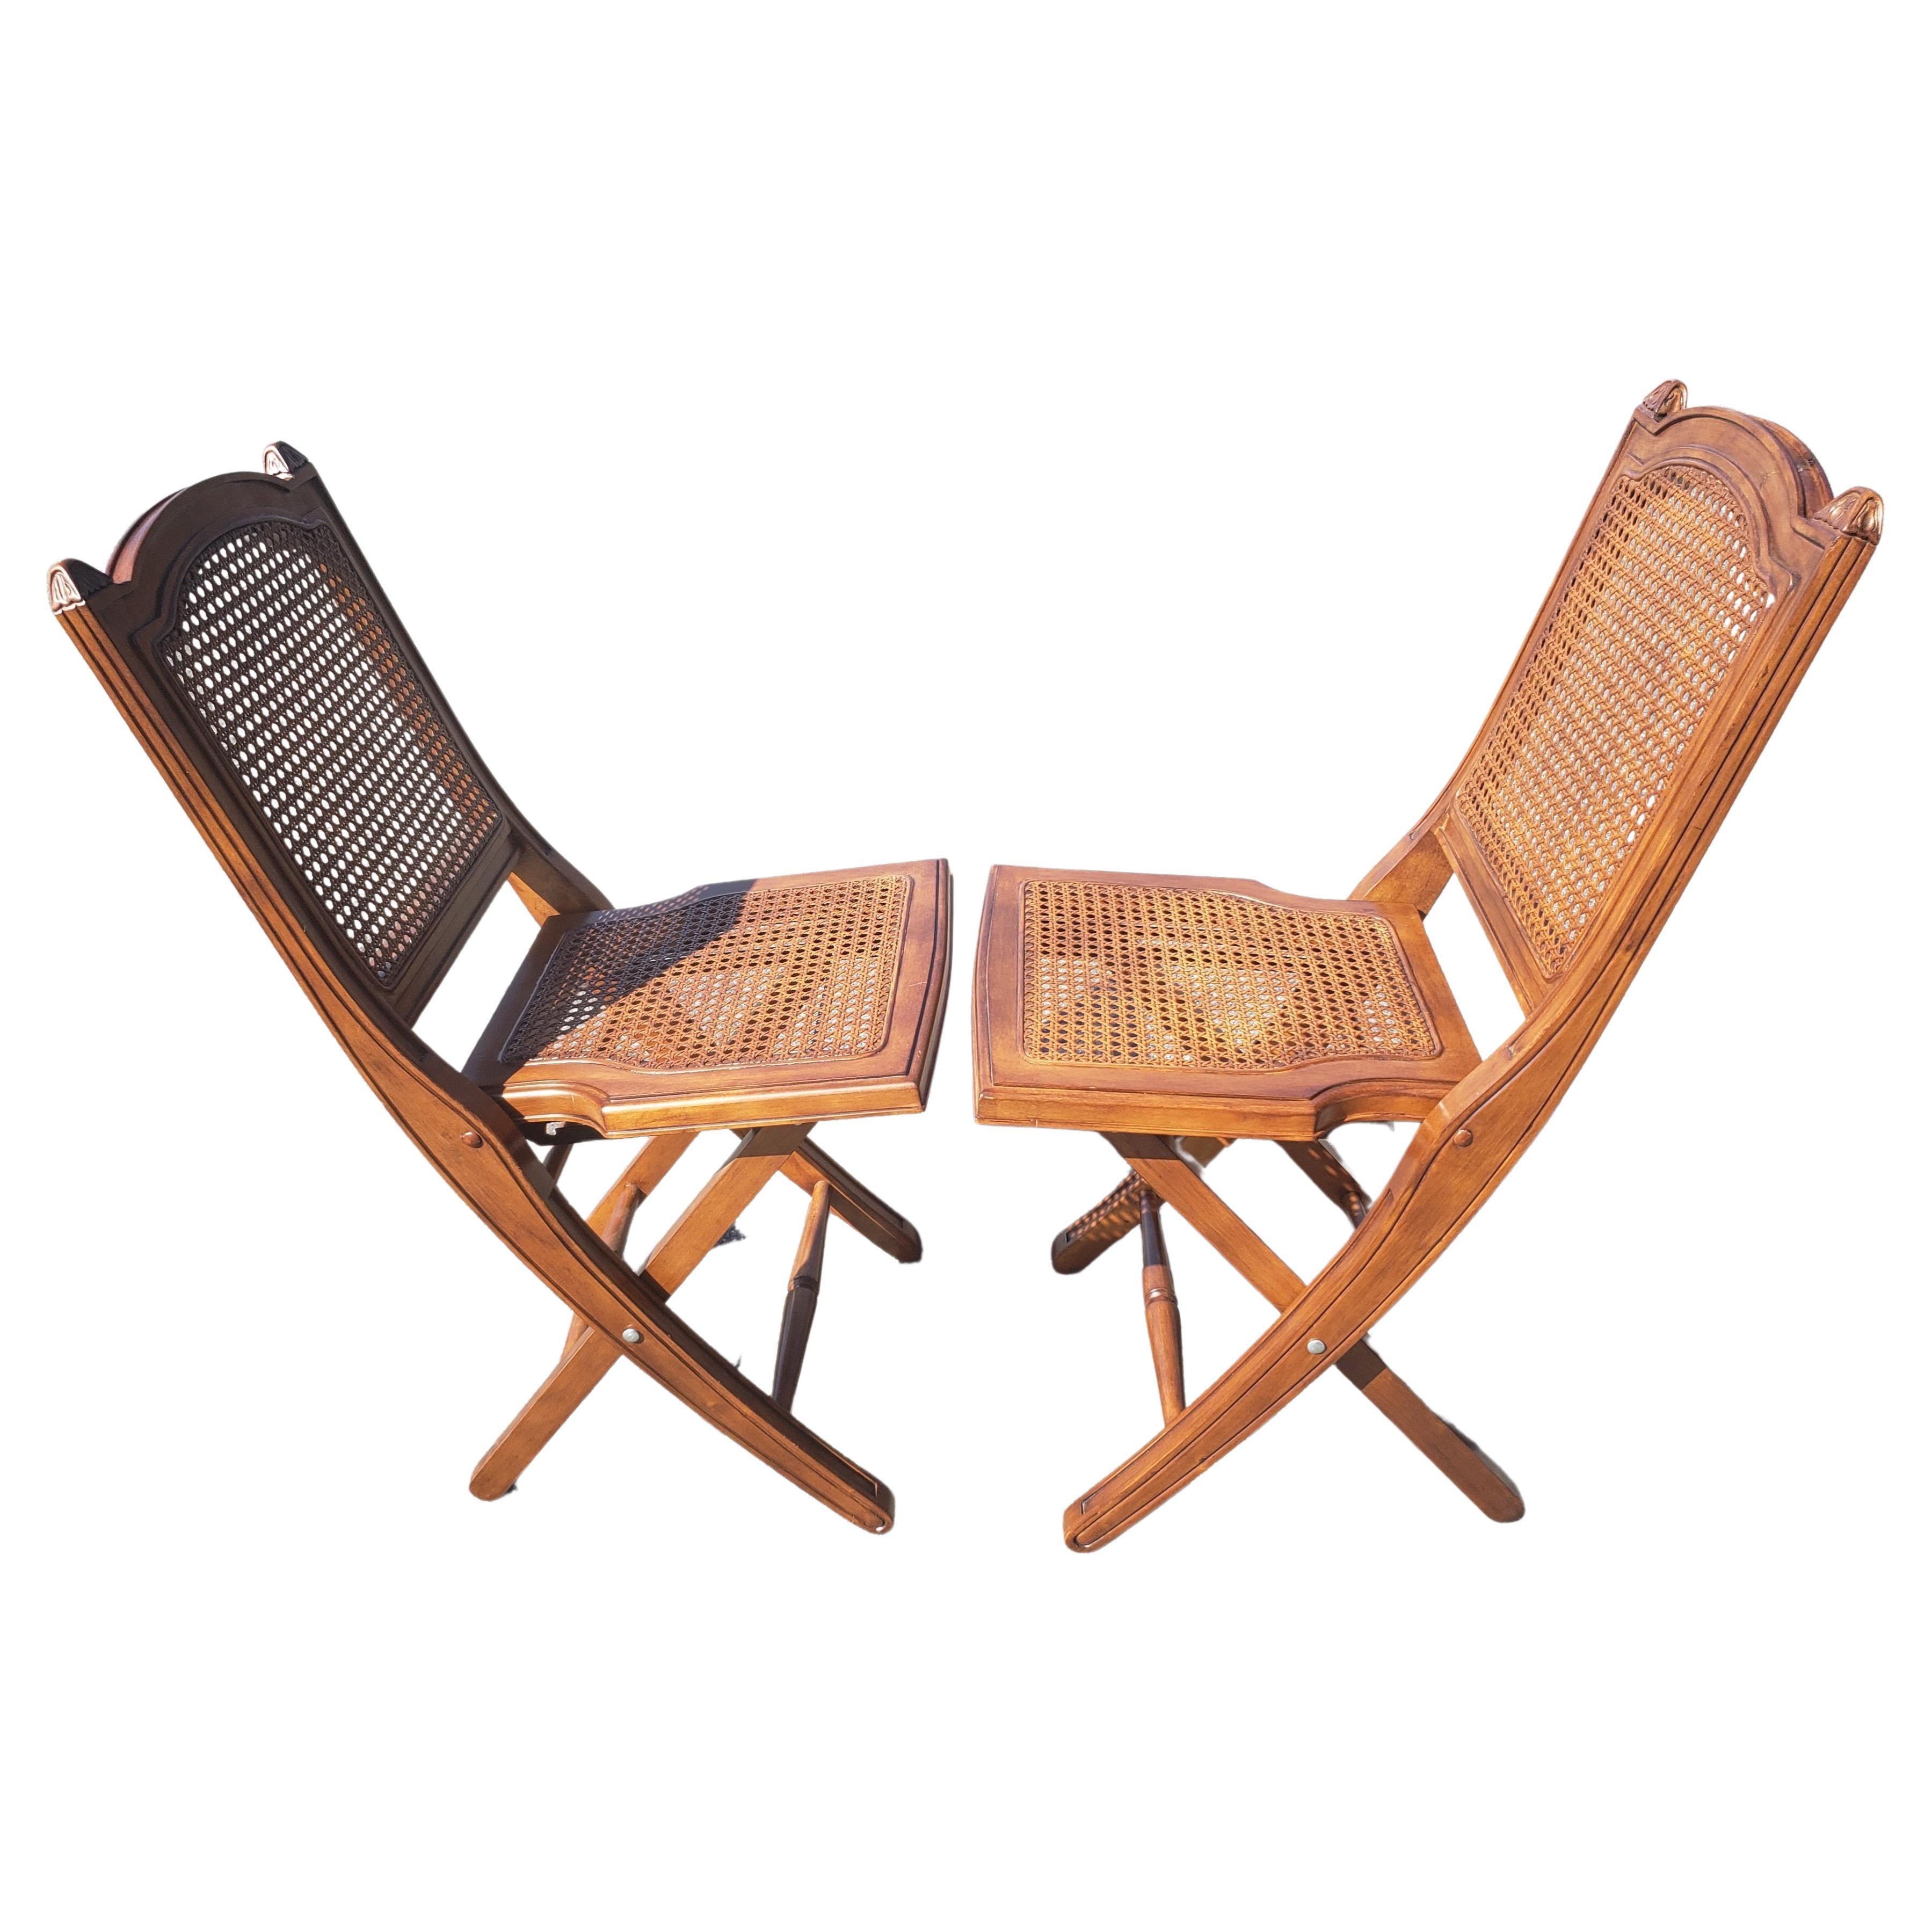 Mid-Century Modern Solid Cherry and Cane Seat and Back Folding Chairs with Cushions, a Pair For Sale